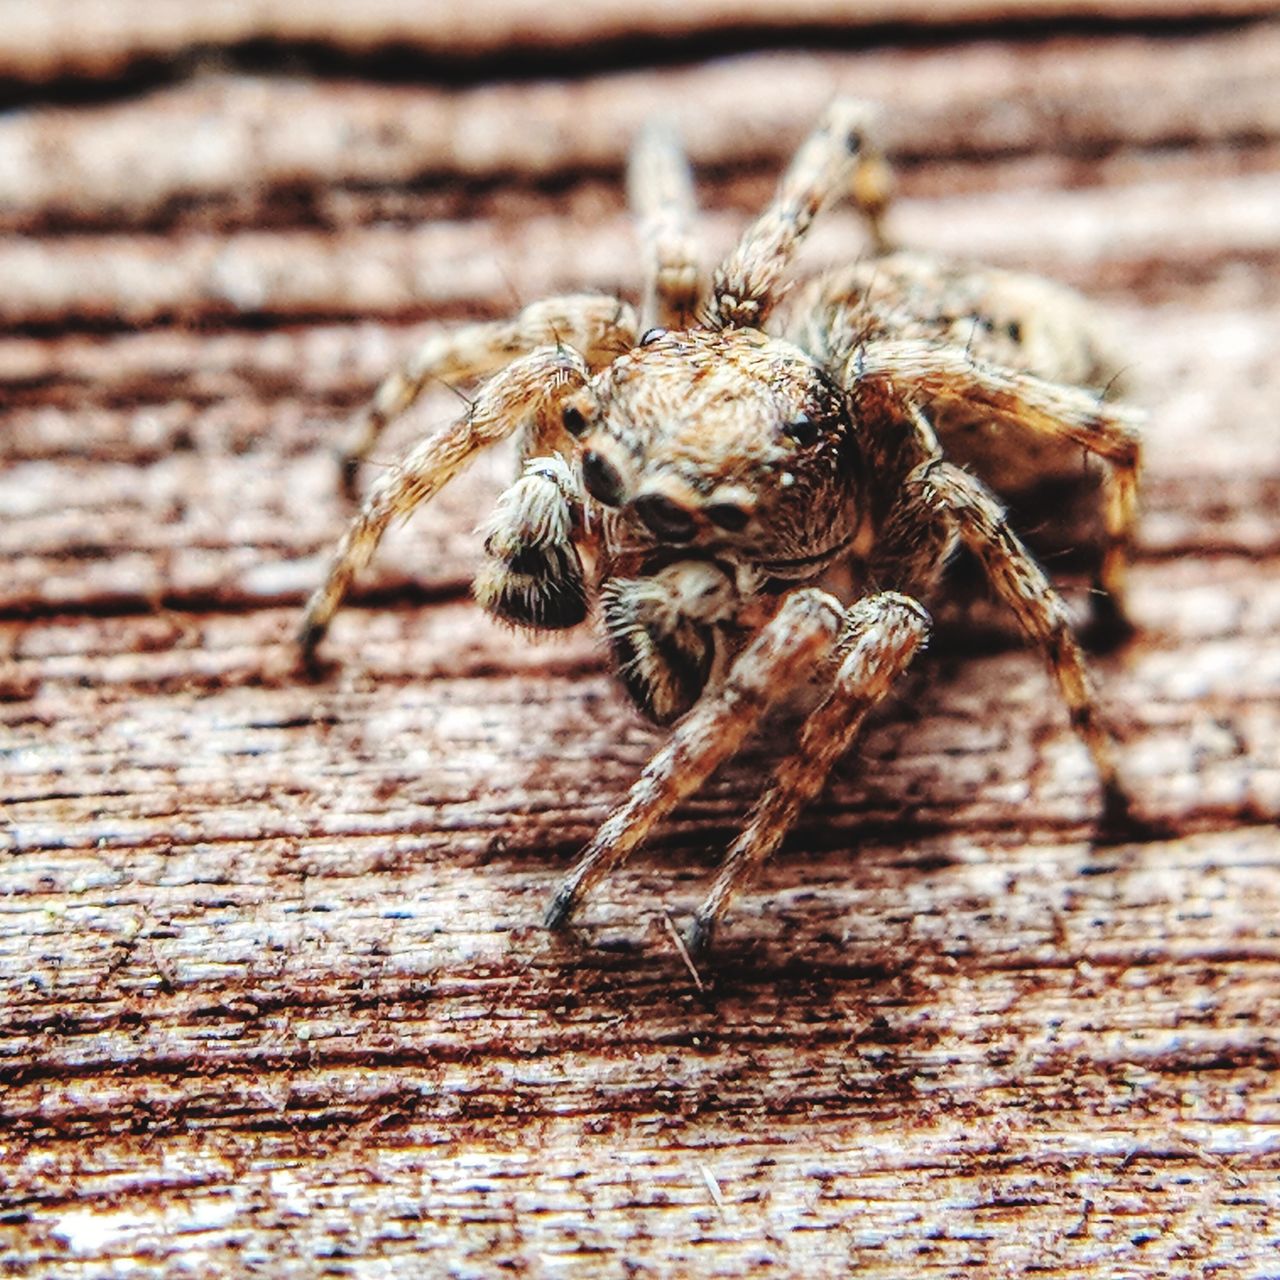 Jumping spider on wood